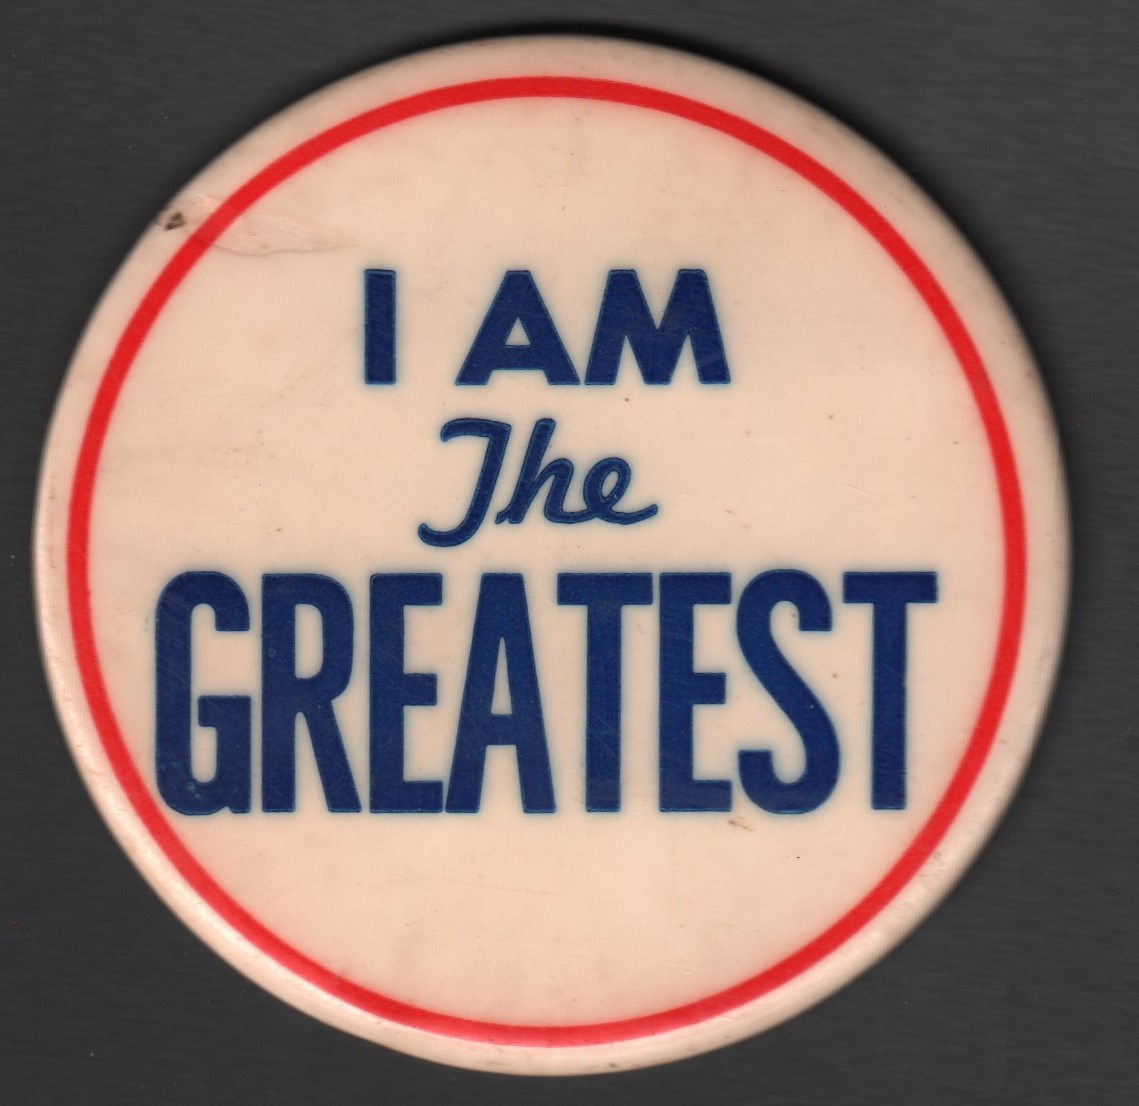 Muhammad Ali & Boxing - Circa 1963 Cassius Clay "I Am The Greatest" Celluloid 3.5" Pin